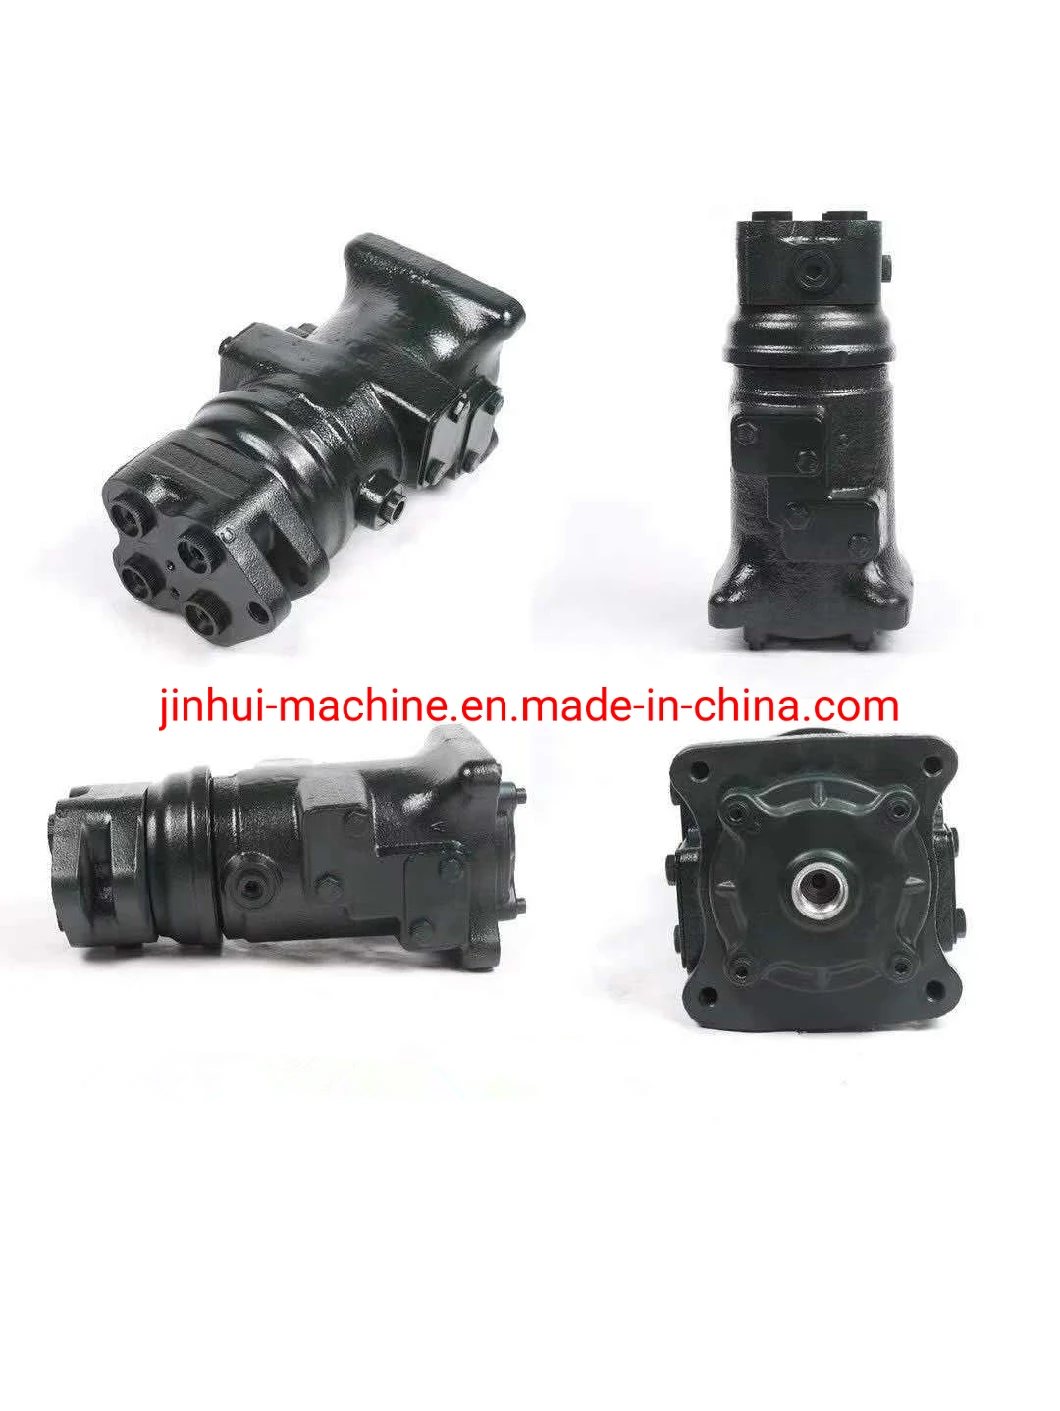 Hydraulic Swivel Center Joint Swing Rotary Connector R200 R210 R220